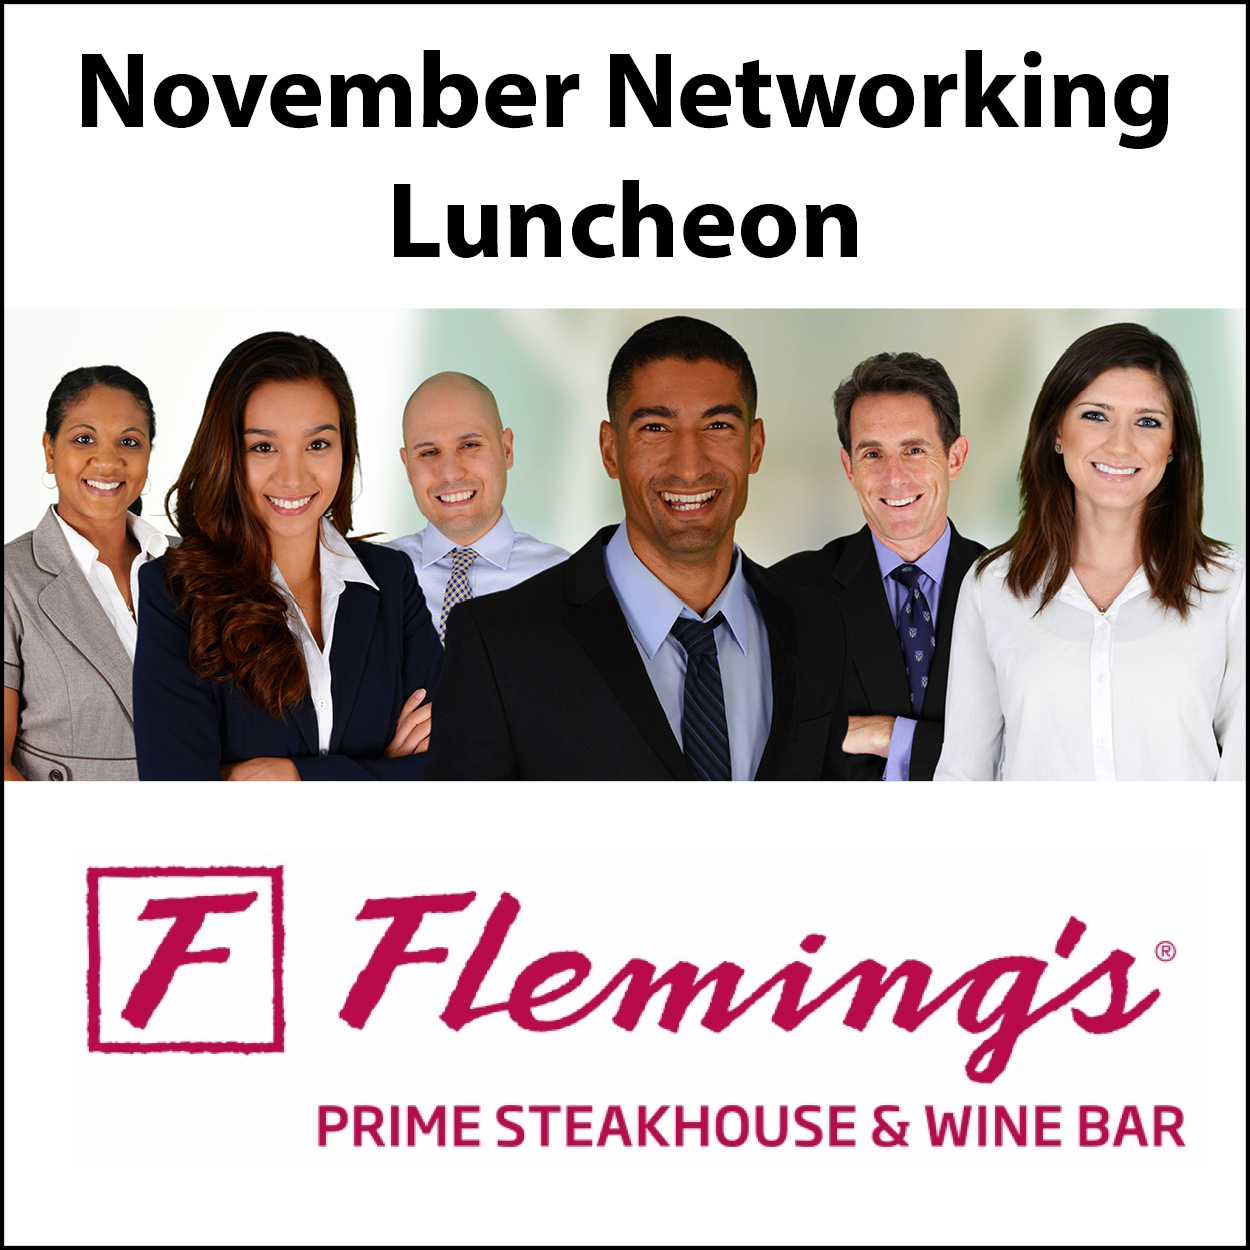 November Business Luncheon at Fleming's Prime Steakhouse - "Catch the White Tiger"